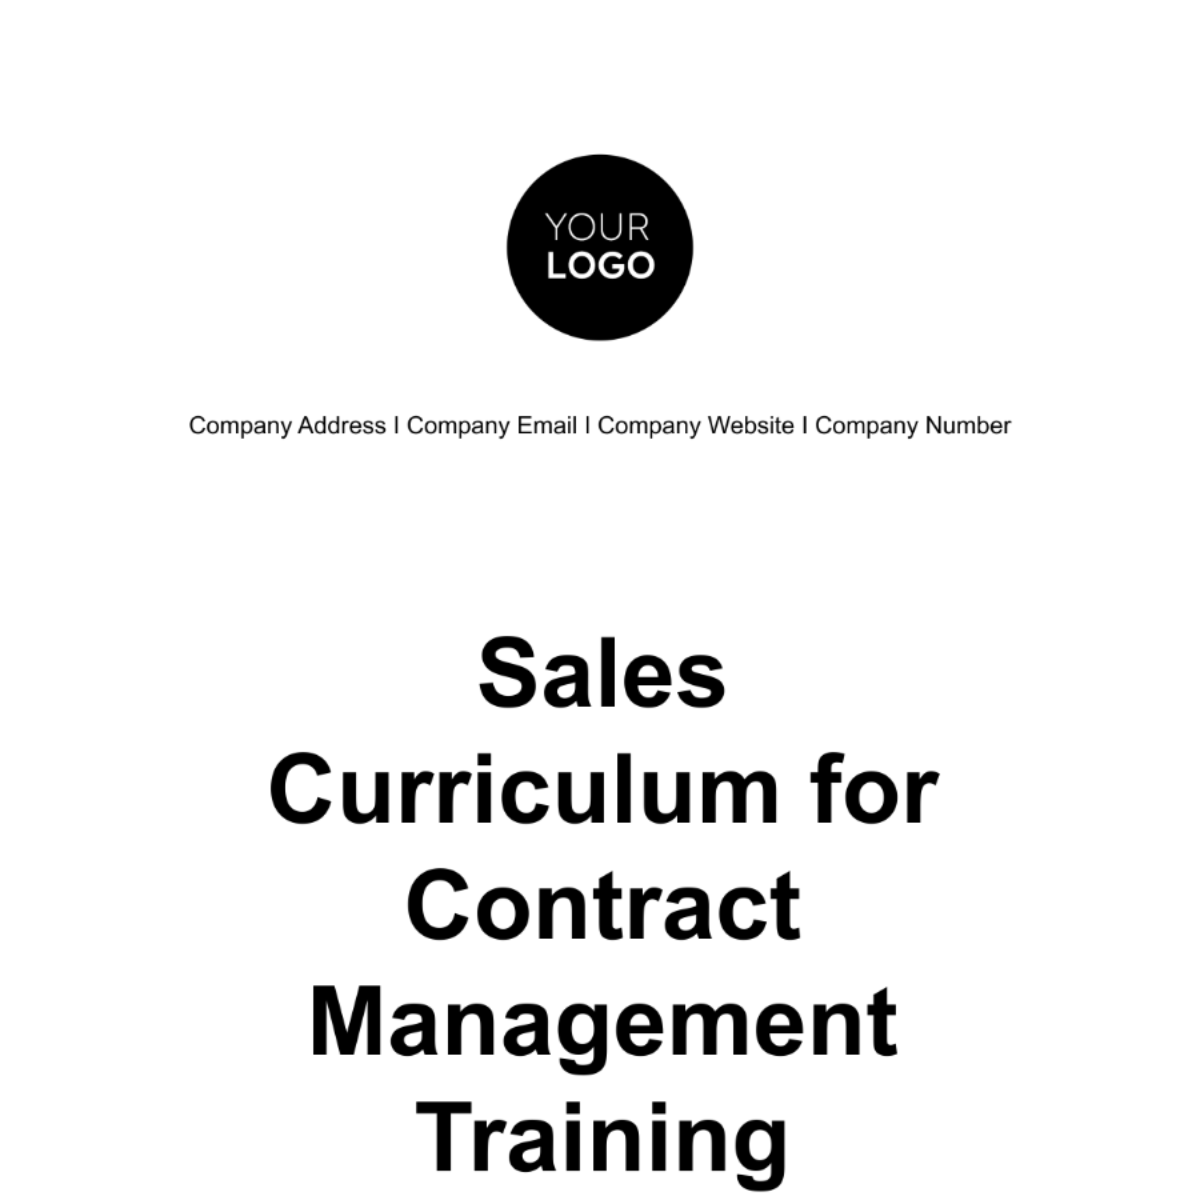 Free Sales Curriculum for Contract Management Training Template